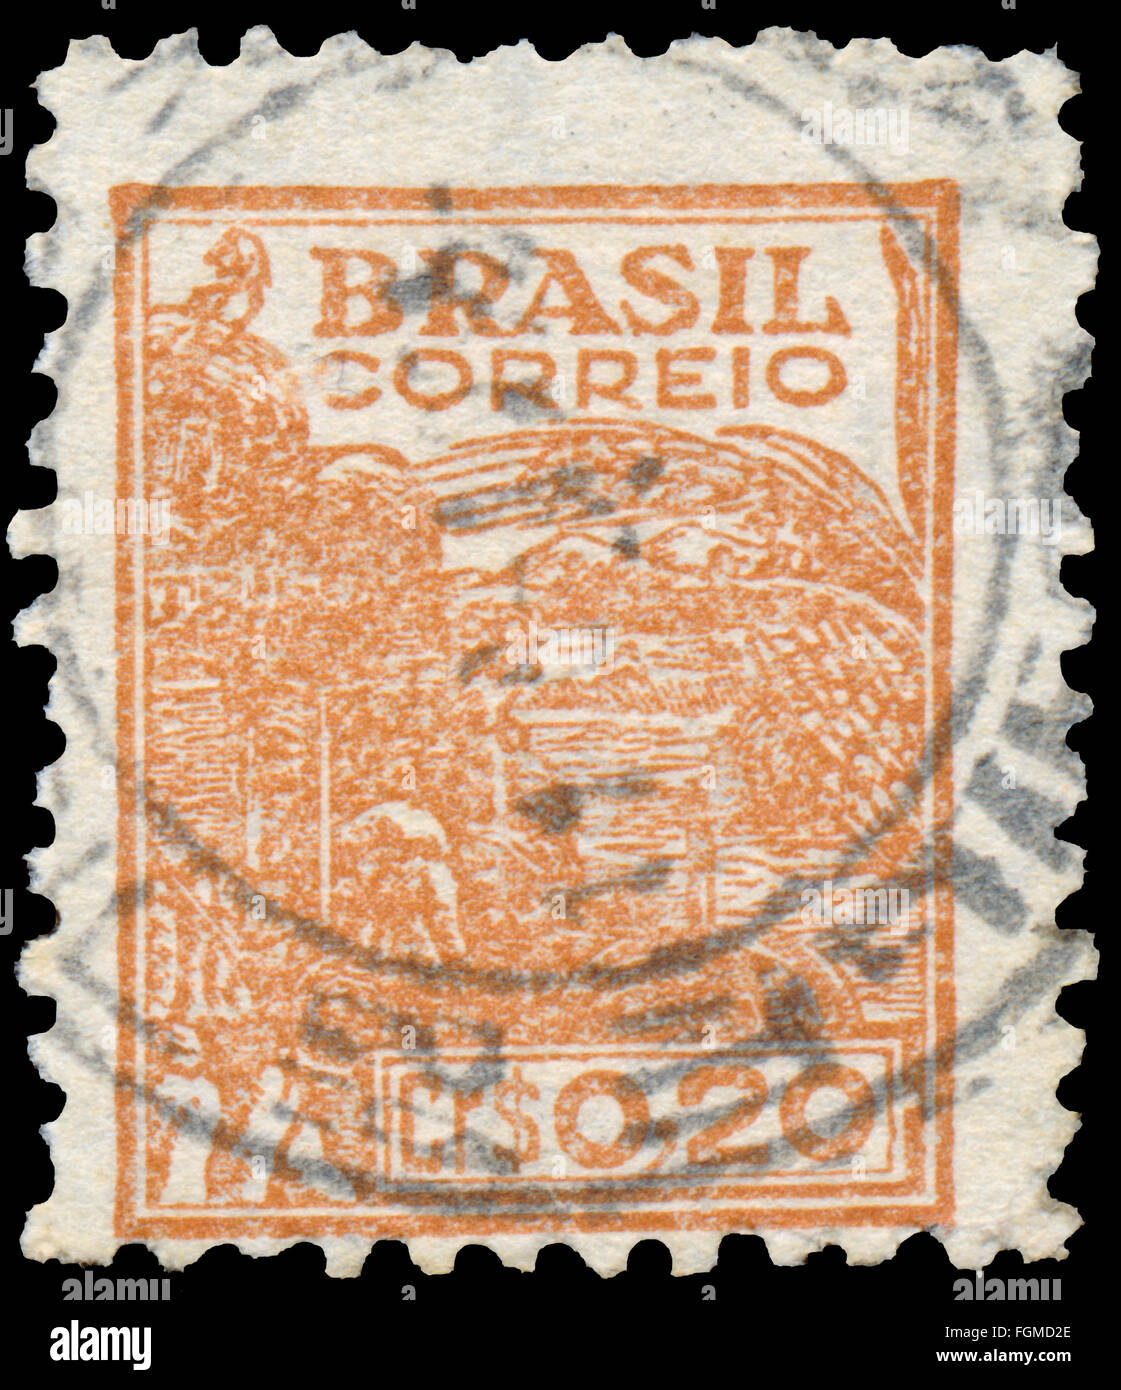 BUDAPEST, HUNGARY - 20 february 2016: a stamp printed in the Brazil showsWheat harvesting machinery, circa 1946 Stock Photo